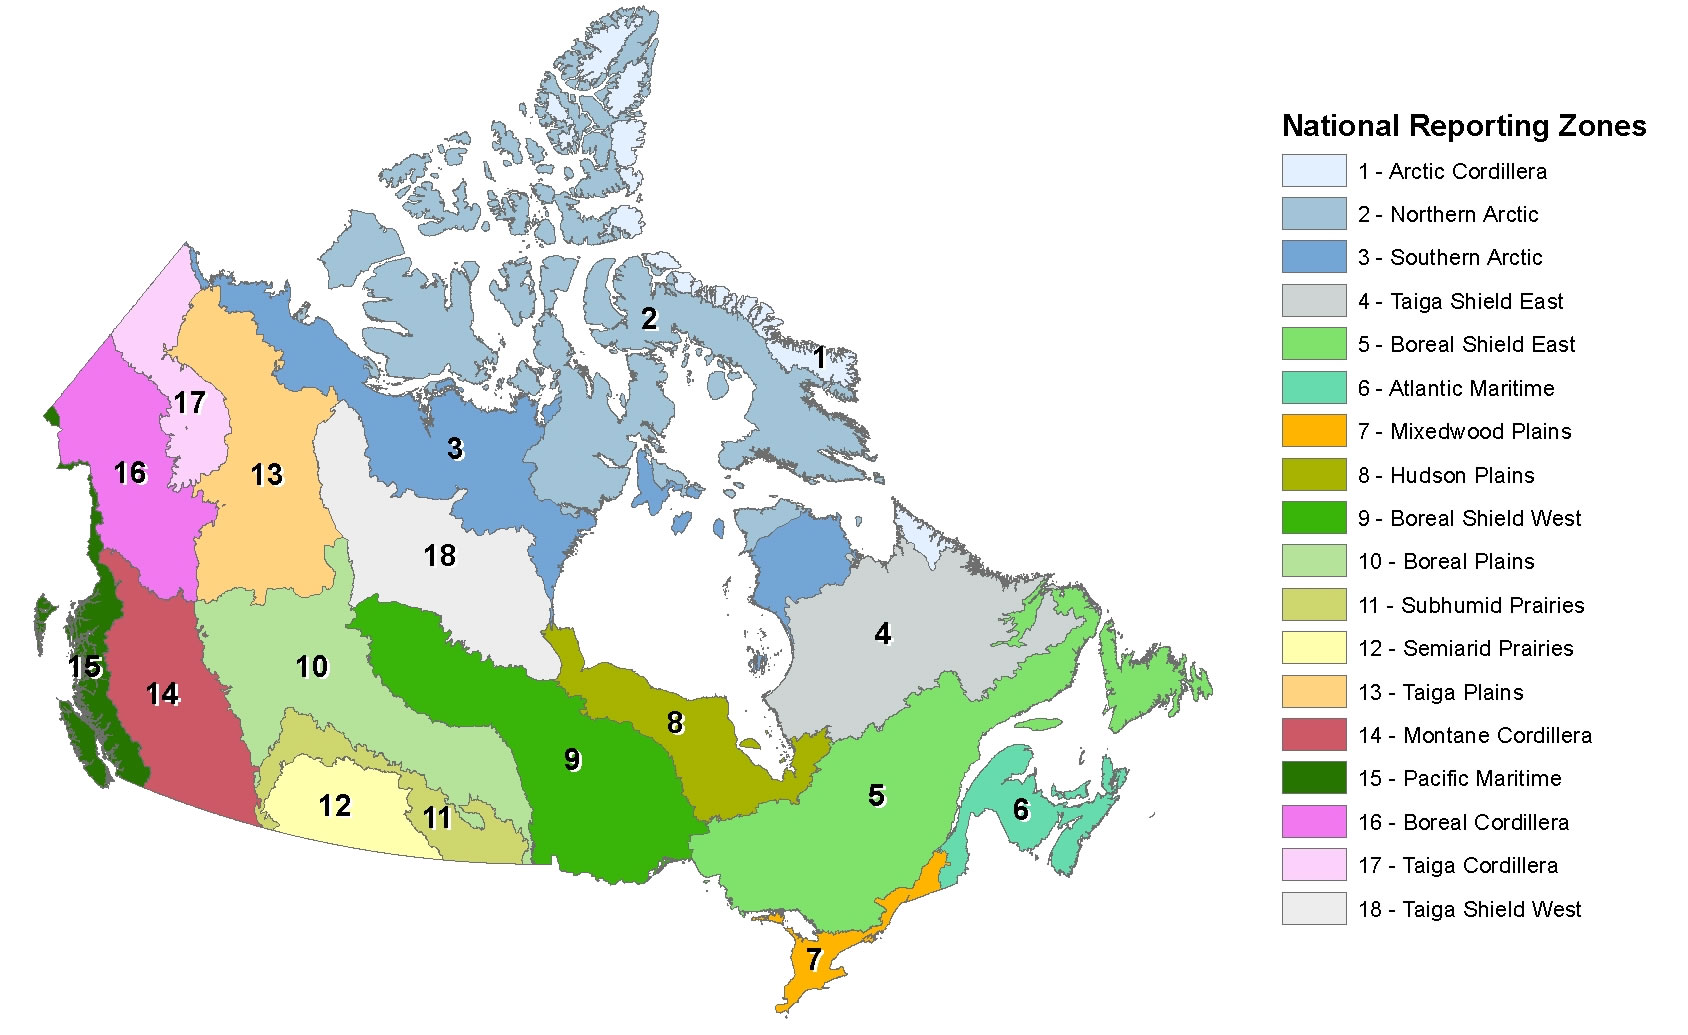 Small-scale map outlining the boundaries of the 18 national reporting zones of the NFCMARS in relation to the terrestrial ecozones of Canada.